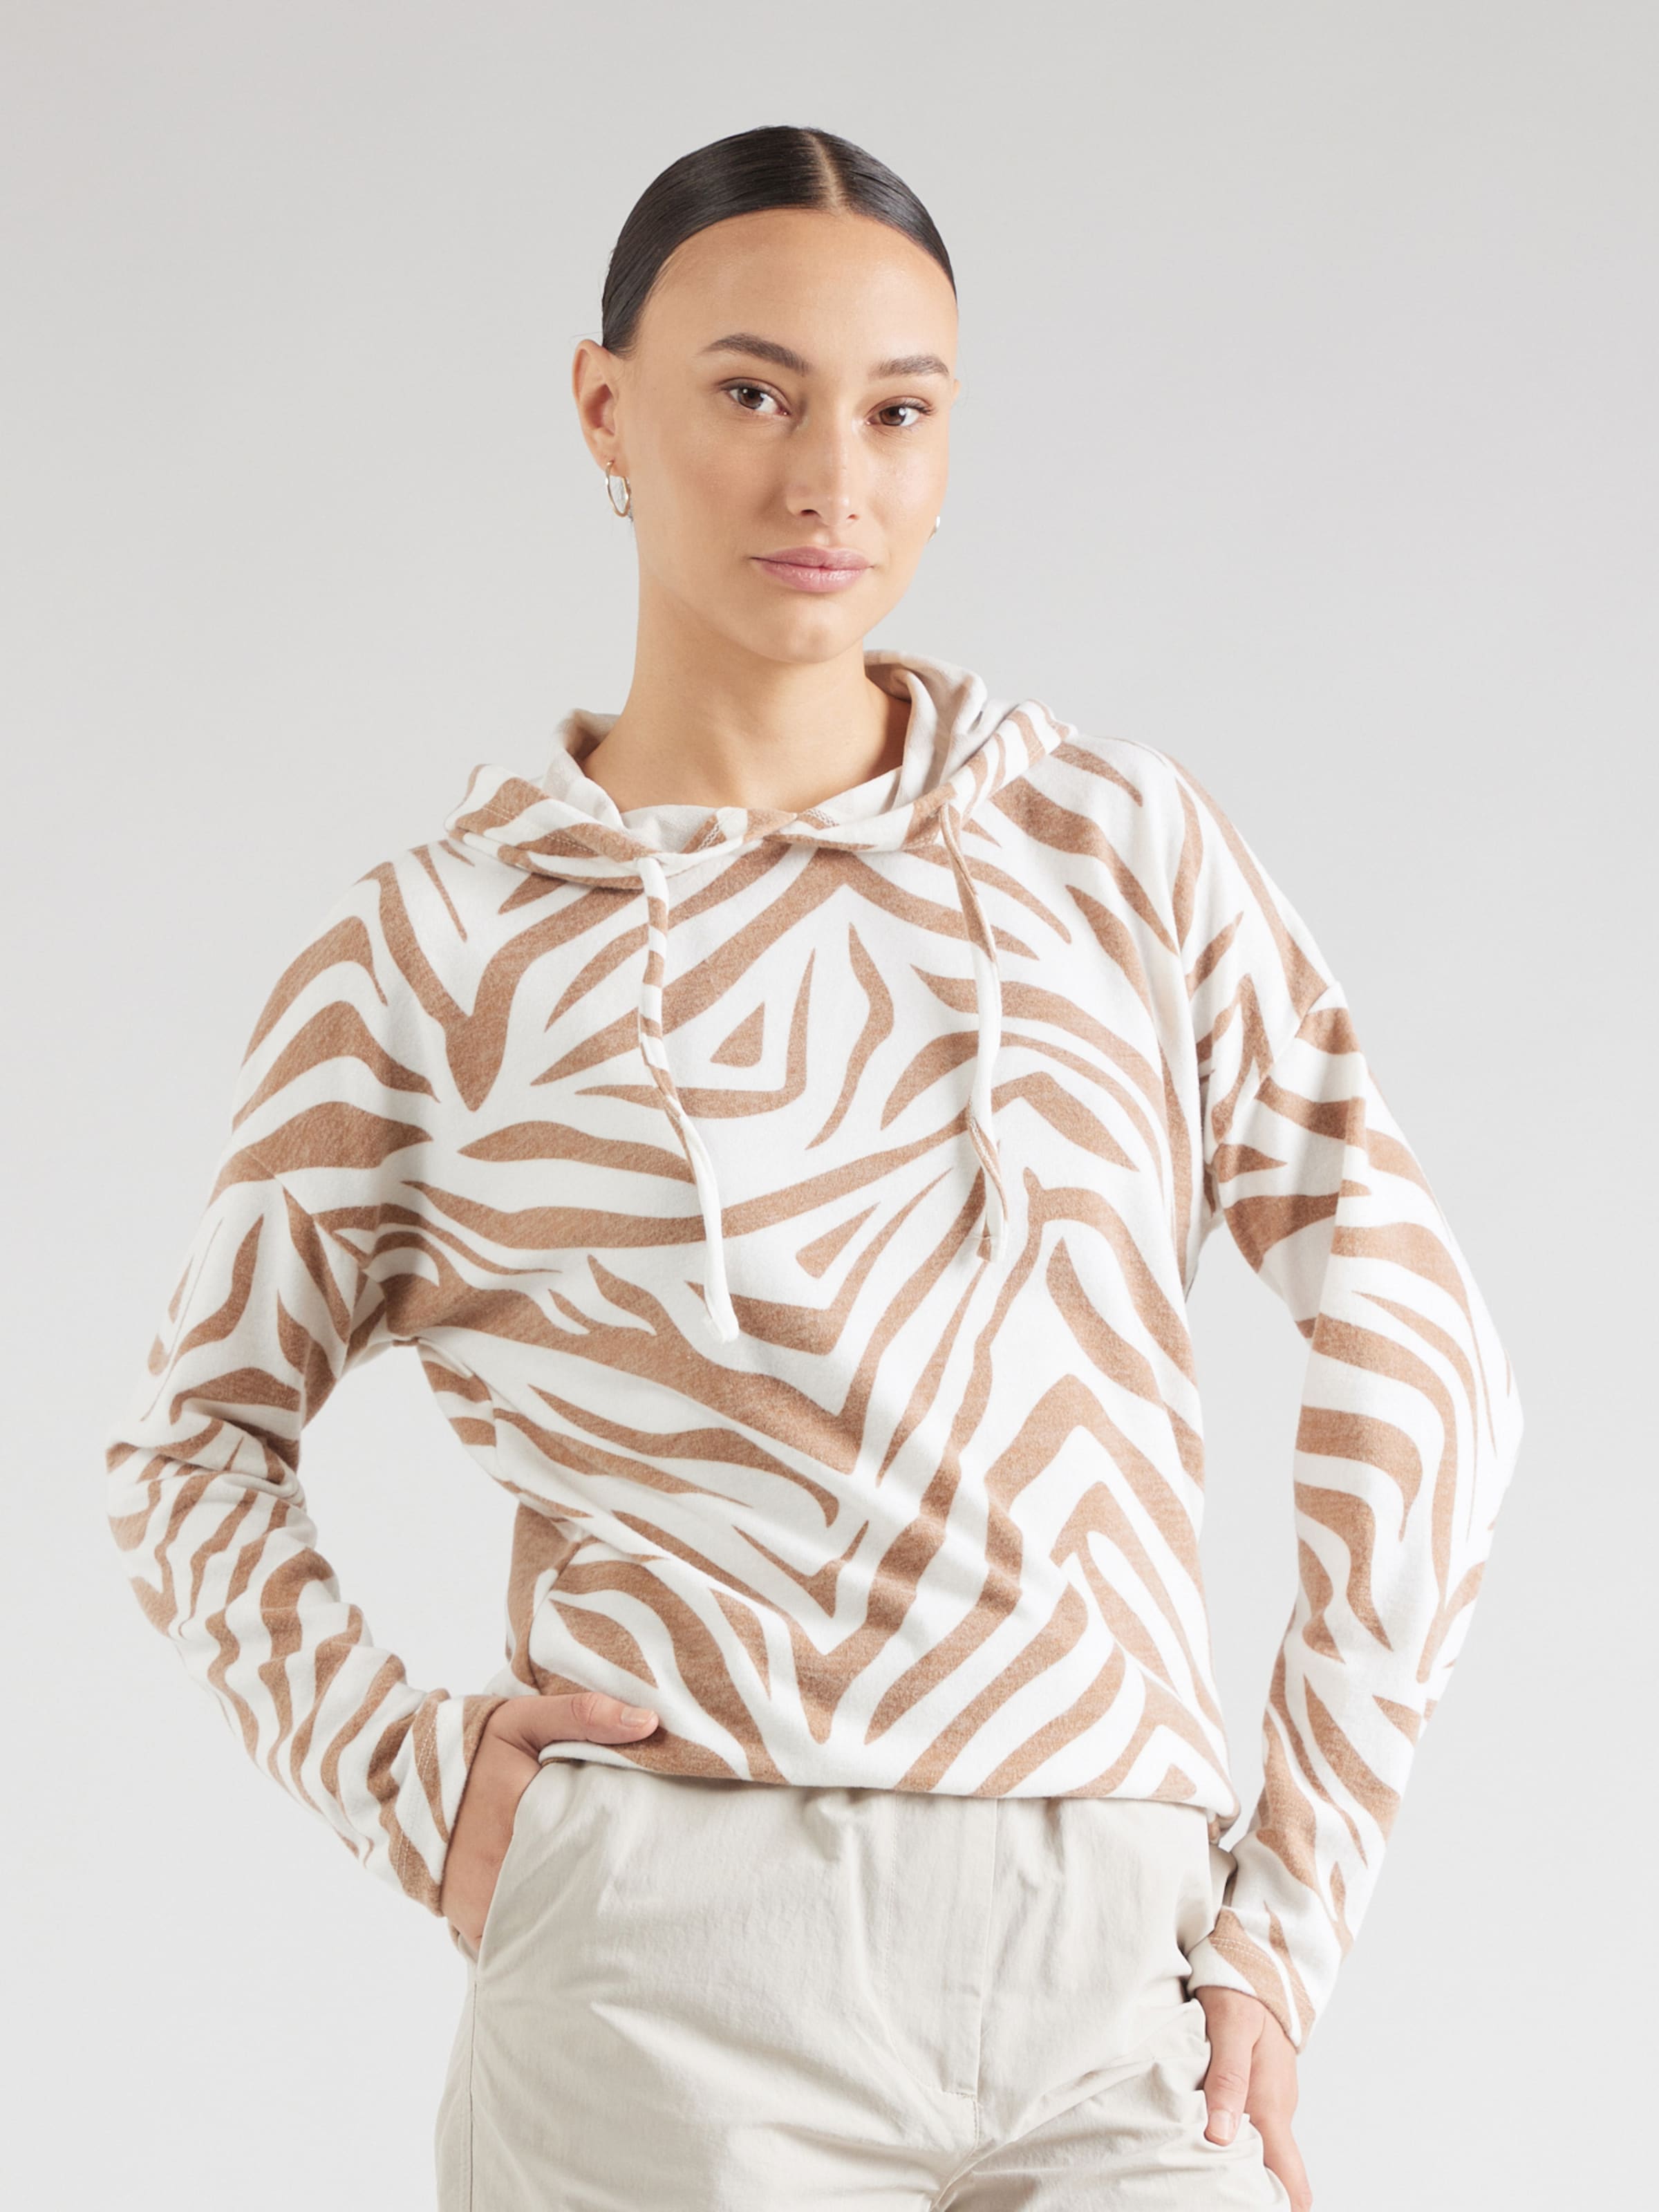 ZABAIONE Shirt 'Br44ianna' in Taupe, White | ABOUT YOU